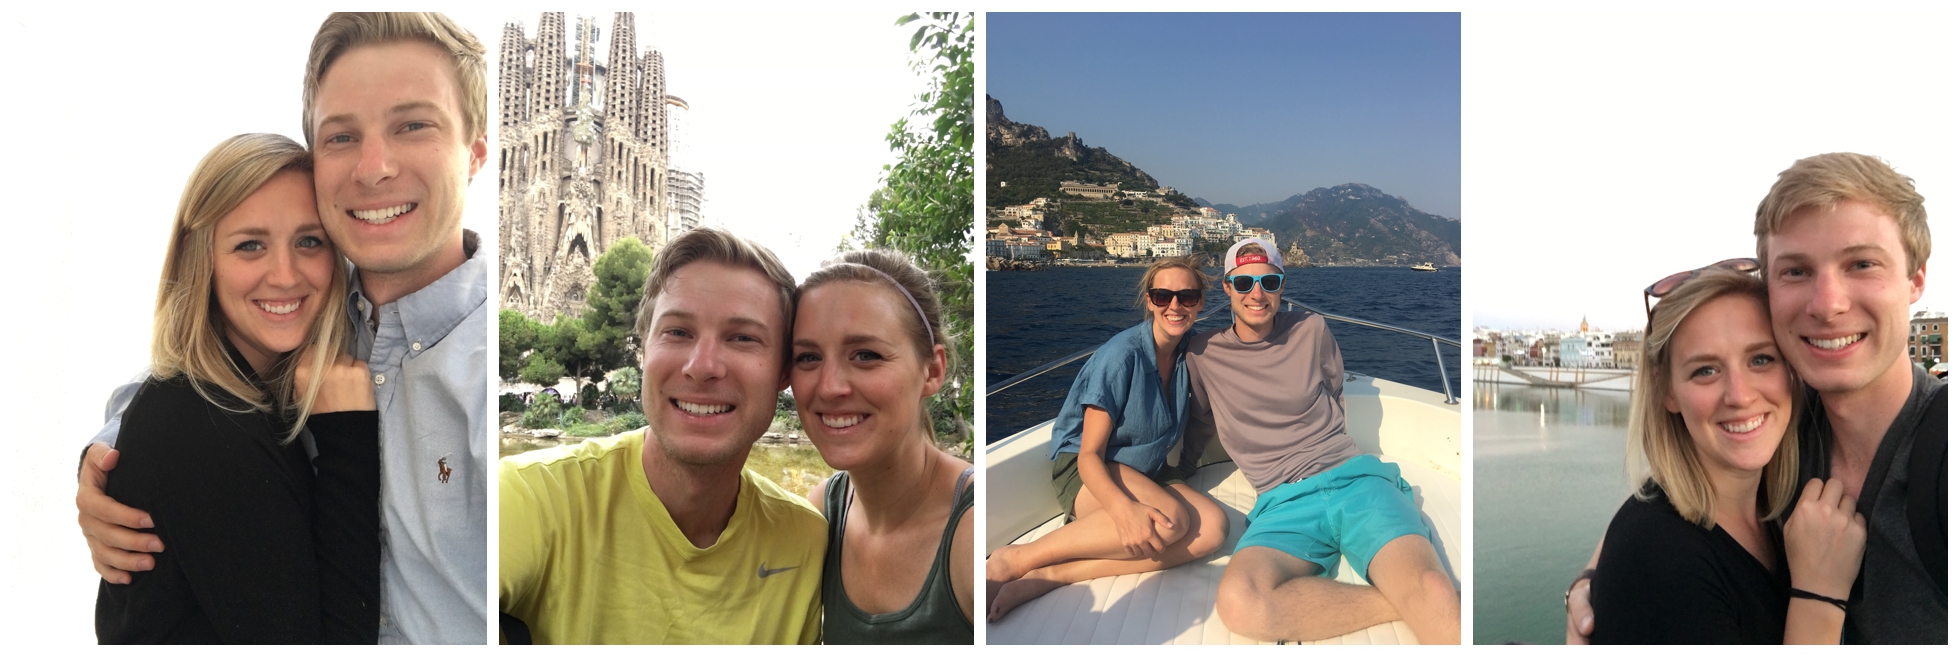 Reflections on our Month of Adventures Abroad